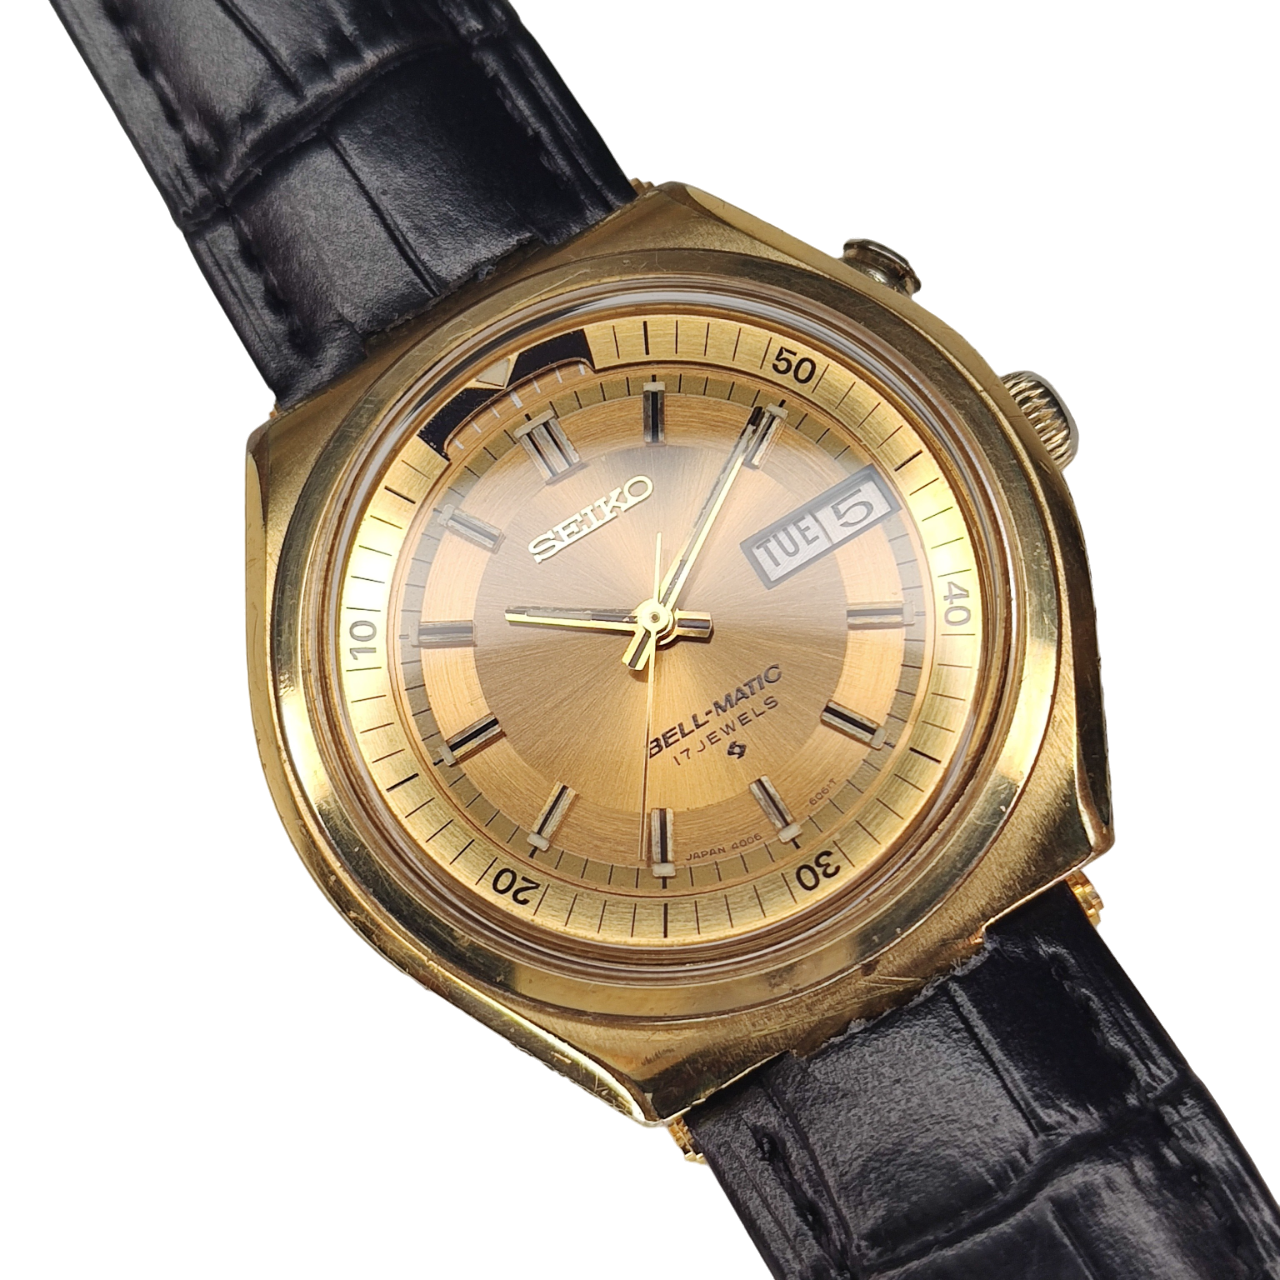 Seiko Bell-Matic automatic vintage 4006-6040 – Temple of Time